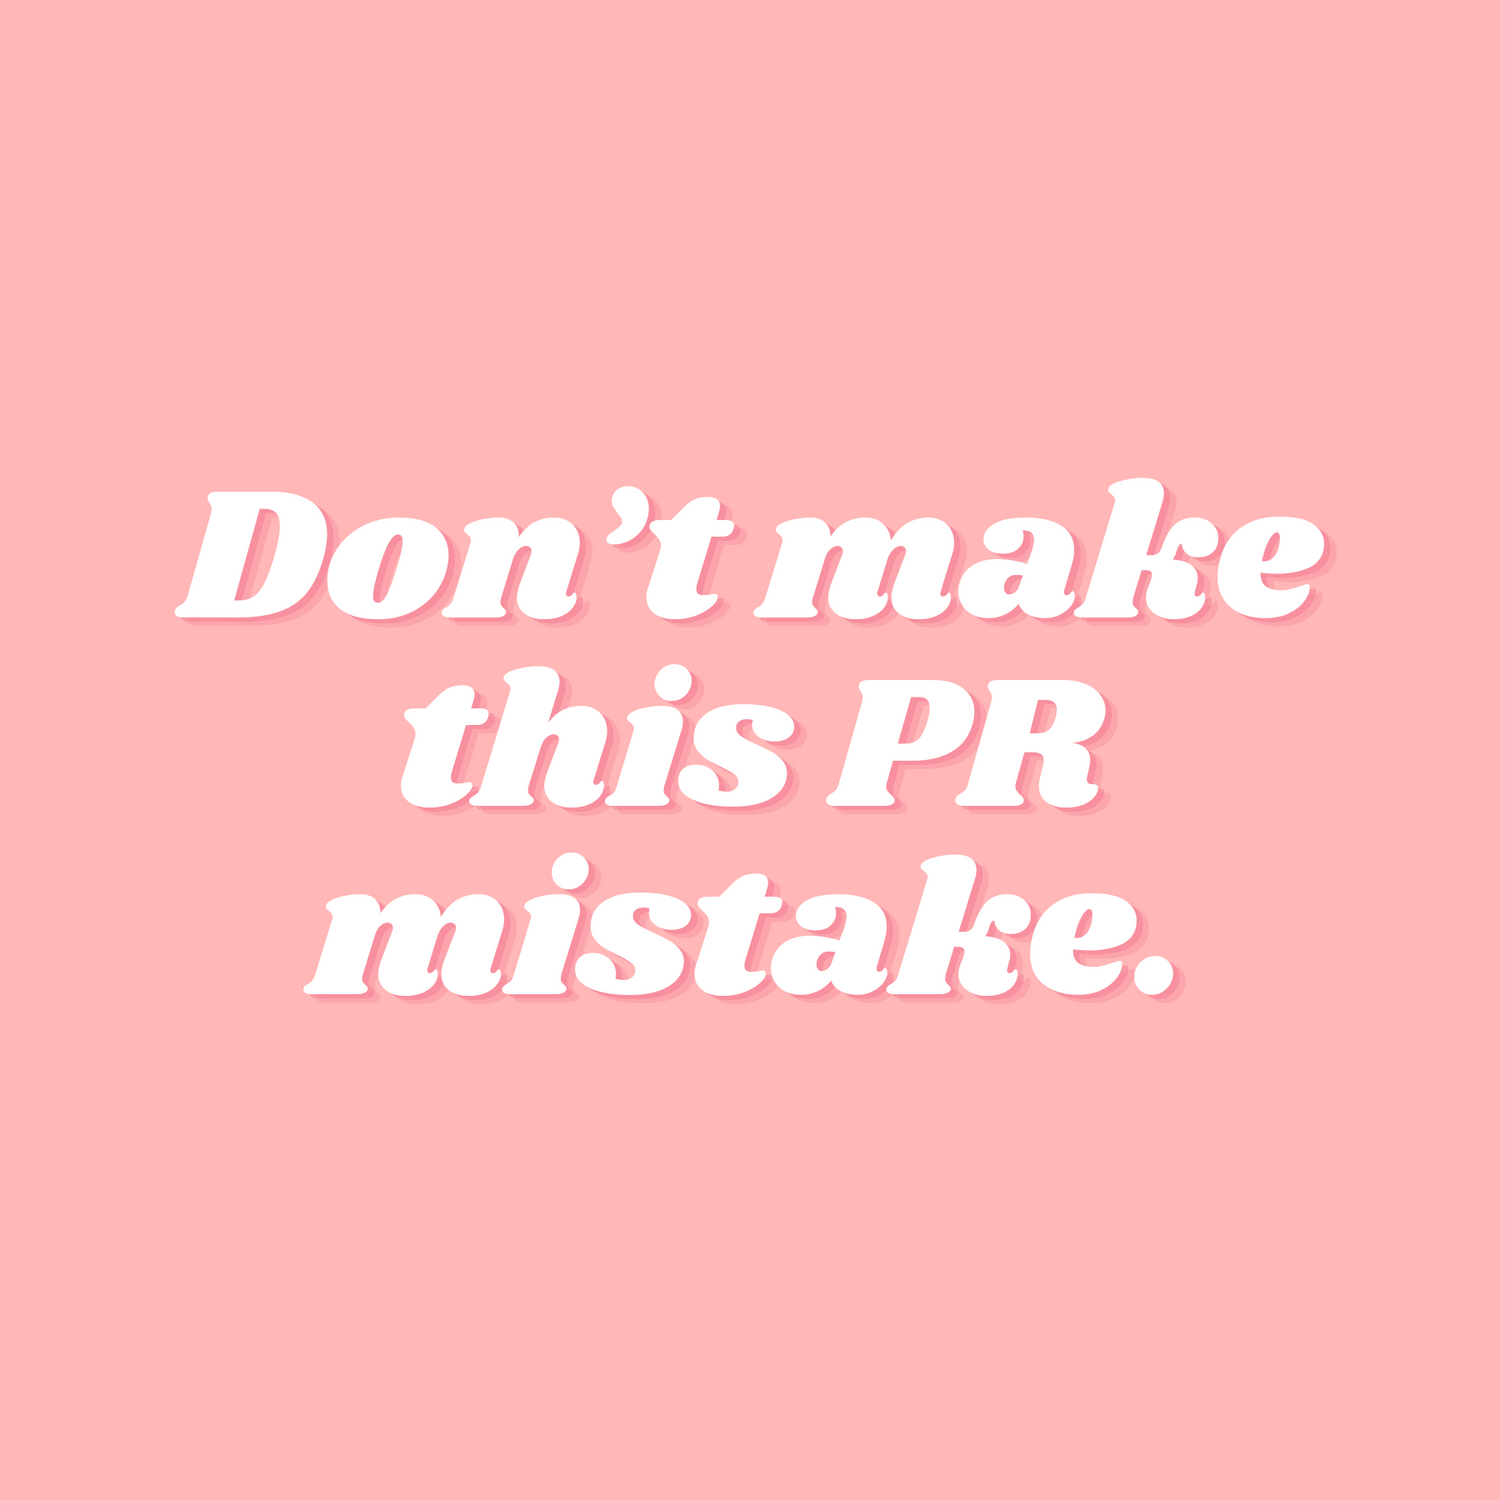 Learn PR and media secrets from Lauren Baxter, the Editor of Australia's famous Peppermint Magazine.